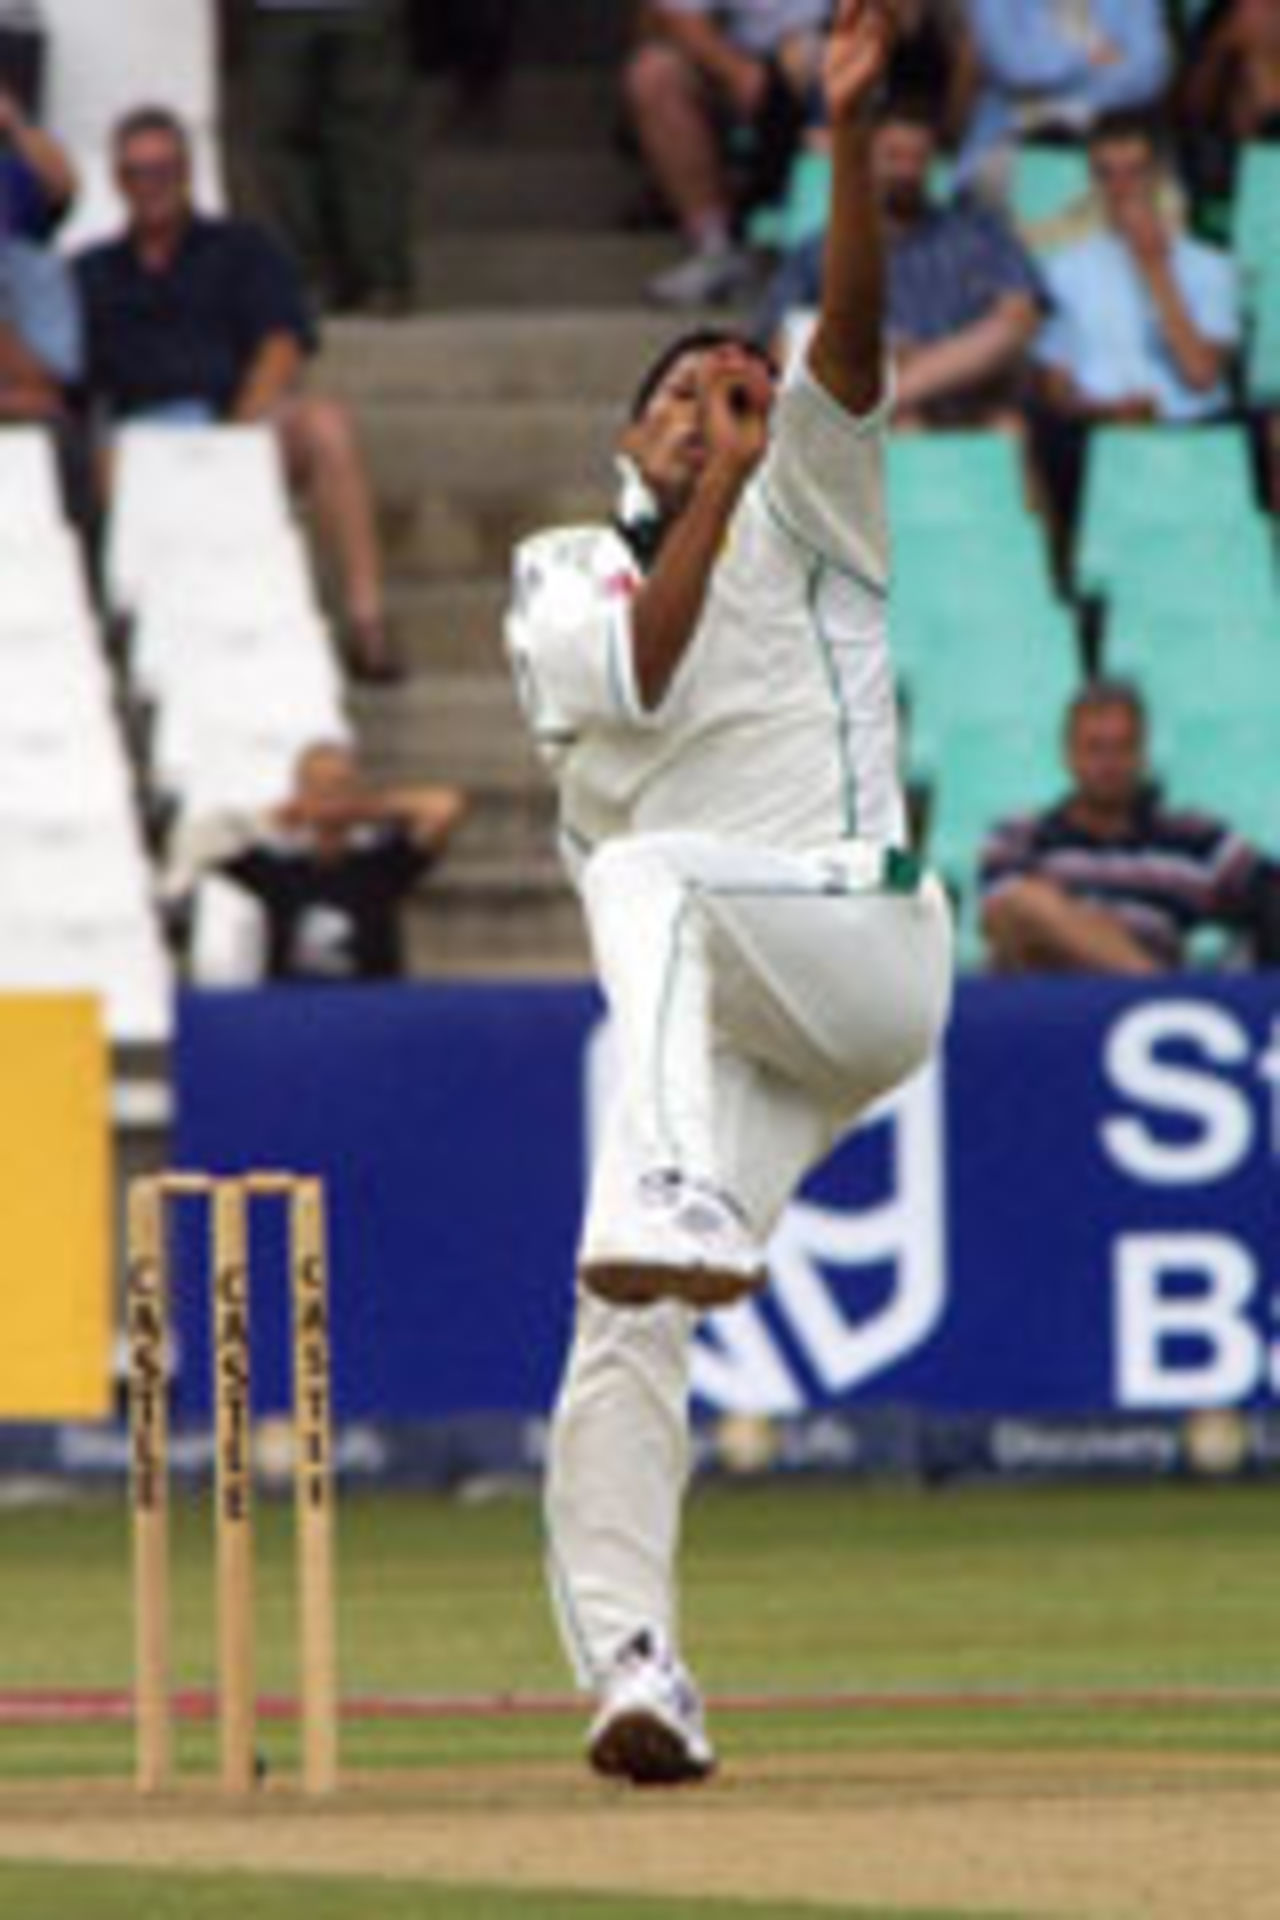 Makhaya Ntini bowling, South Africa v West Indies, Durban, 2nd Test, December 26, 2003